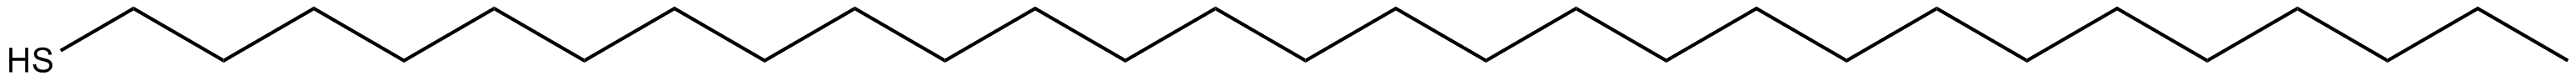 Image of 1-octacosanethiol